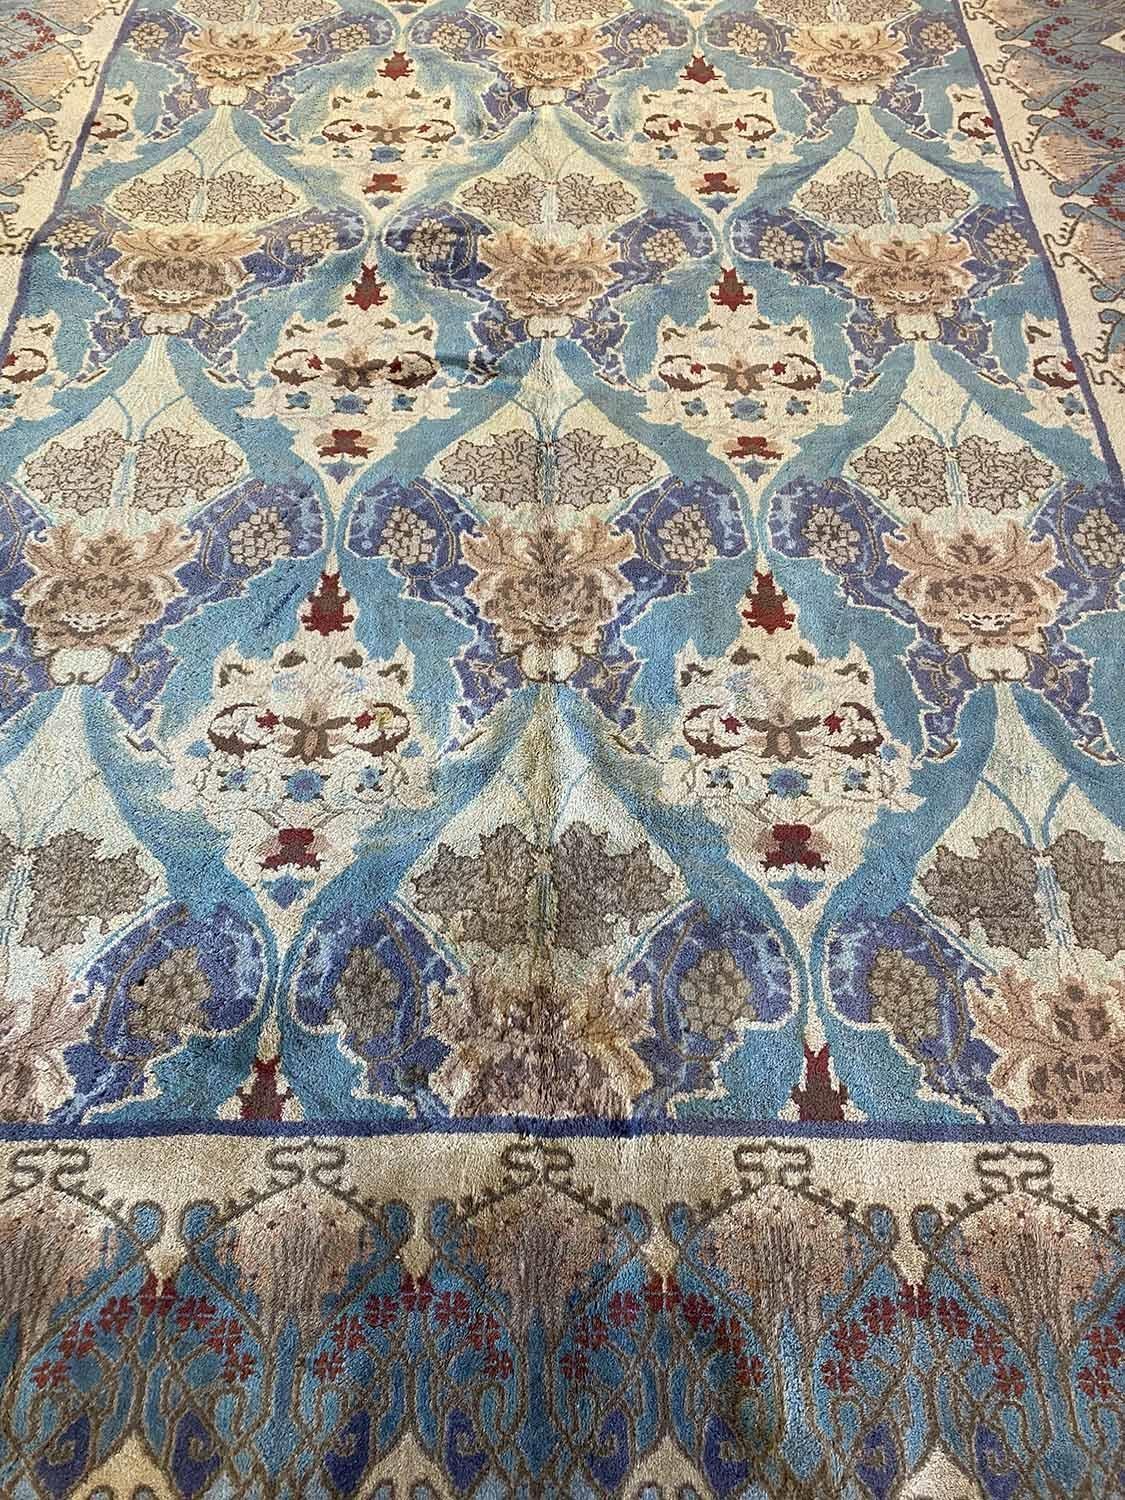 LIBERTY DESIGN CARPET, 345cm x 250cm, Arts and Crafts inspired. - Image 3 of 3